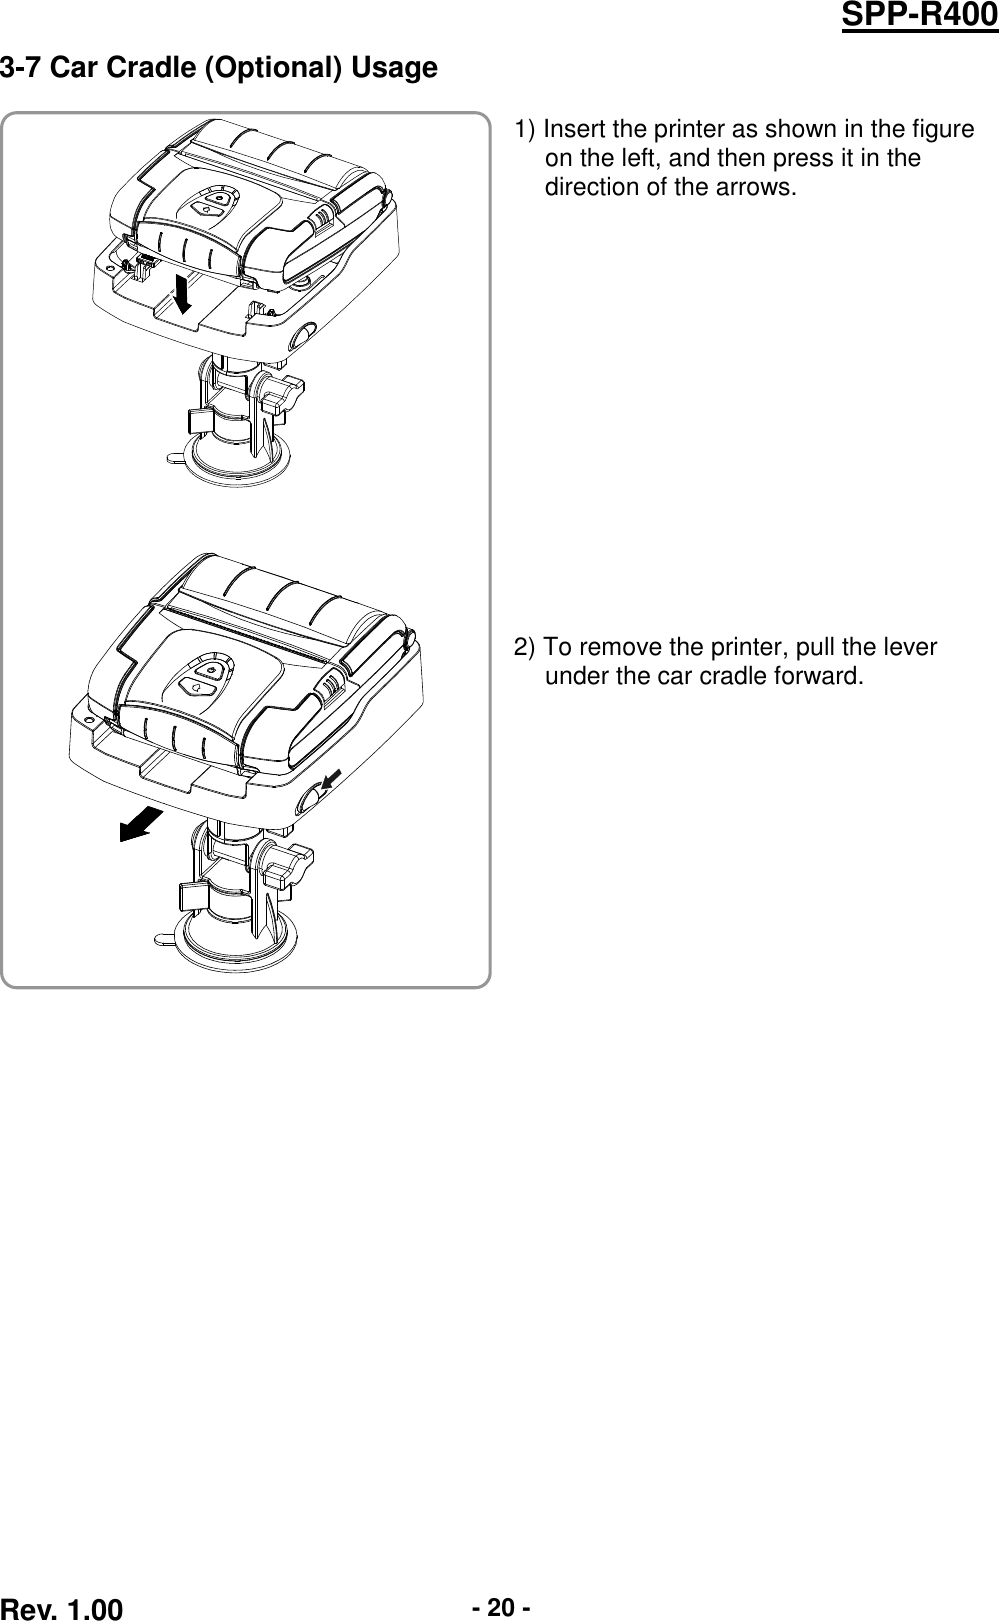  Rev. 1.00 - 20 - SPP-R400 3-7 Car Cradle (Optional) Usage     1) Insert the printer as shown in the figure on the left, and then press it in the direction of the arrows.                2) To remove the printer, pull the lever under the car cradle forward.        